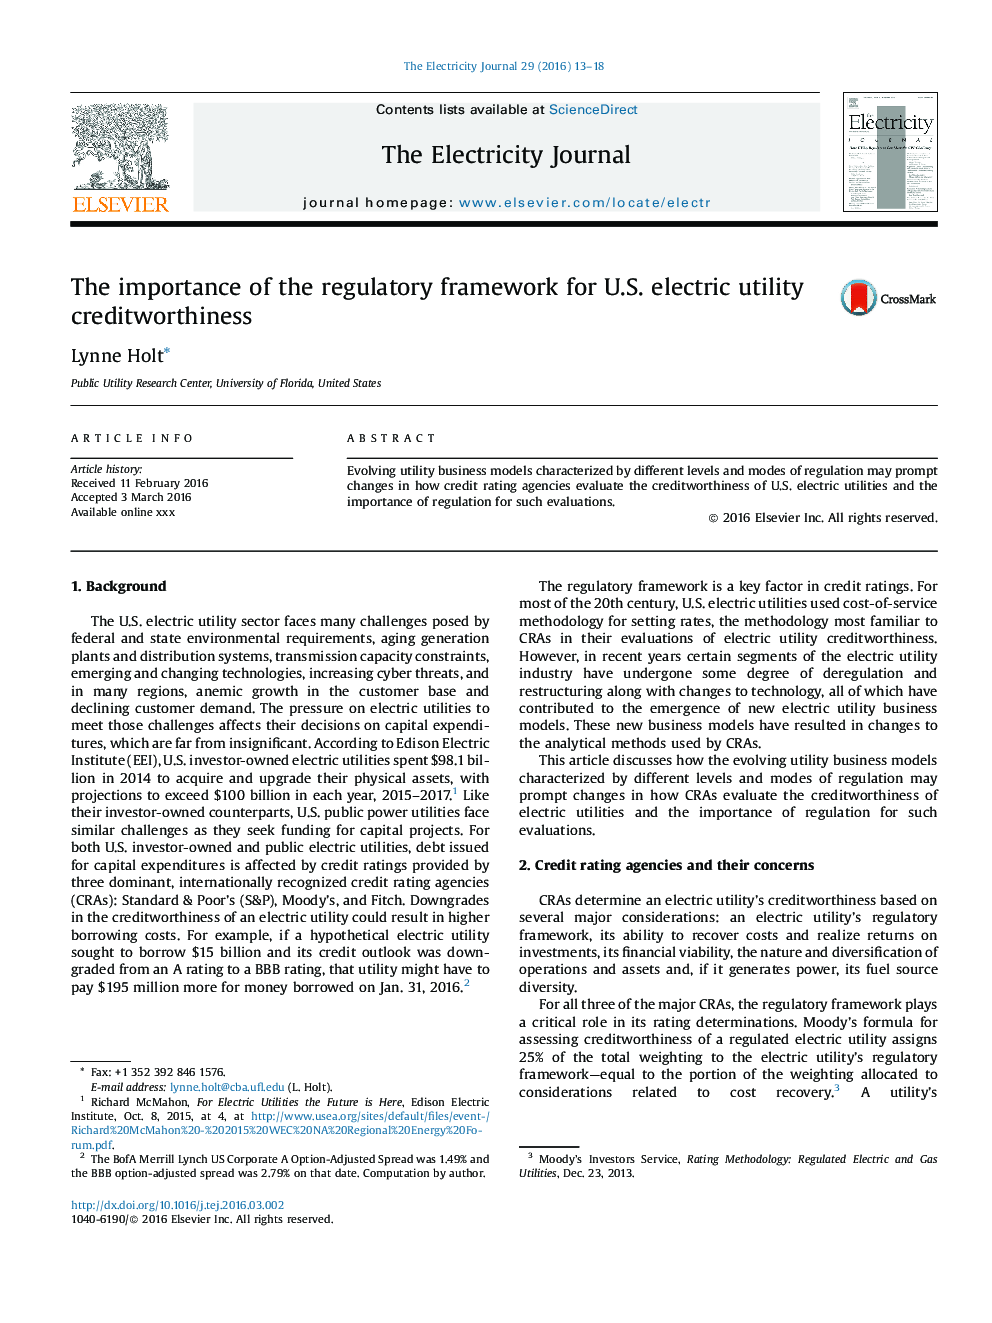 The importance of the regulatory framework for U.S. electric utility creditworthiness